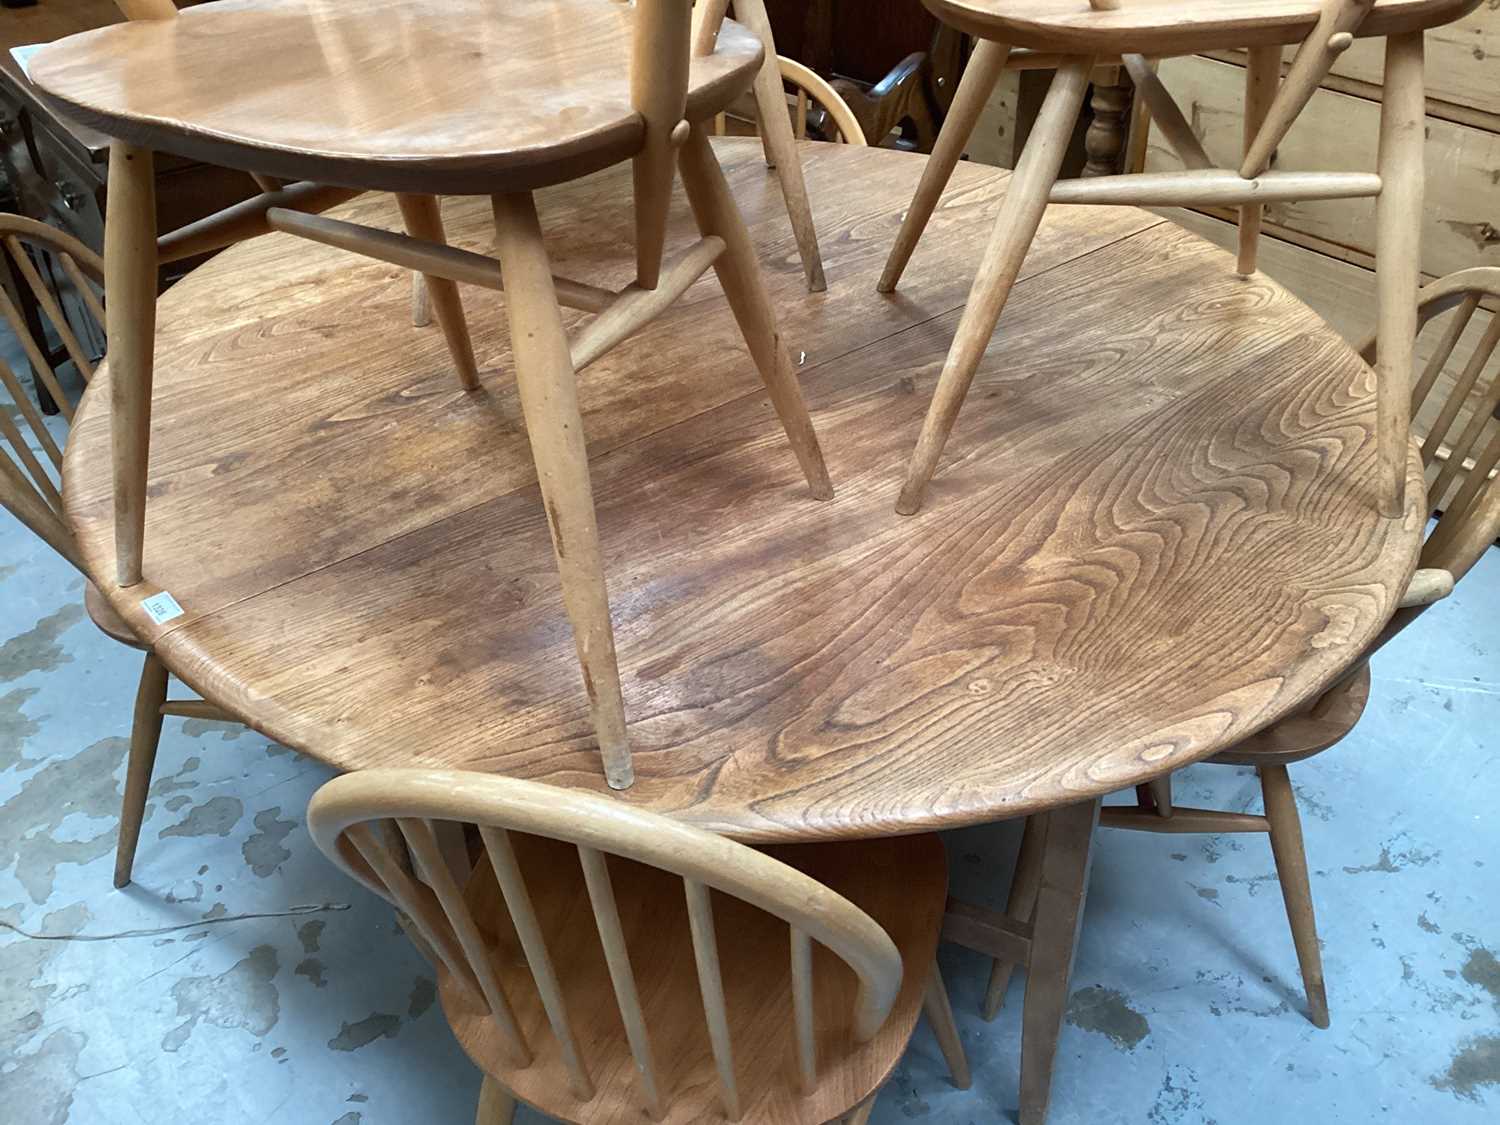 Ercol elm oval dropleaf kitchen table opening to 127 x 141cm and seven Ercol stick back chairs compr - Image 2 of 3